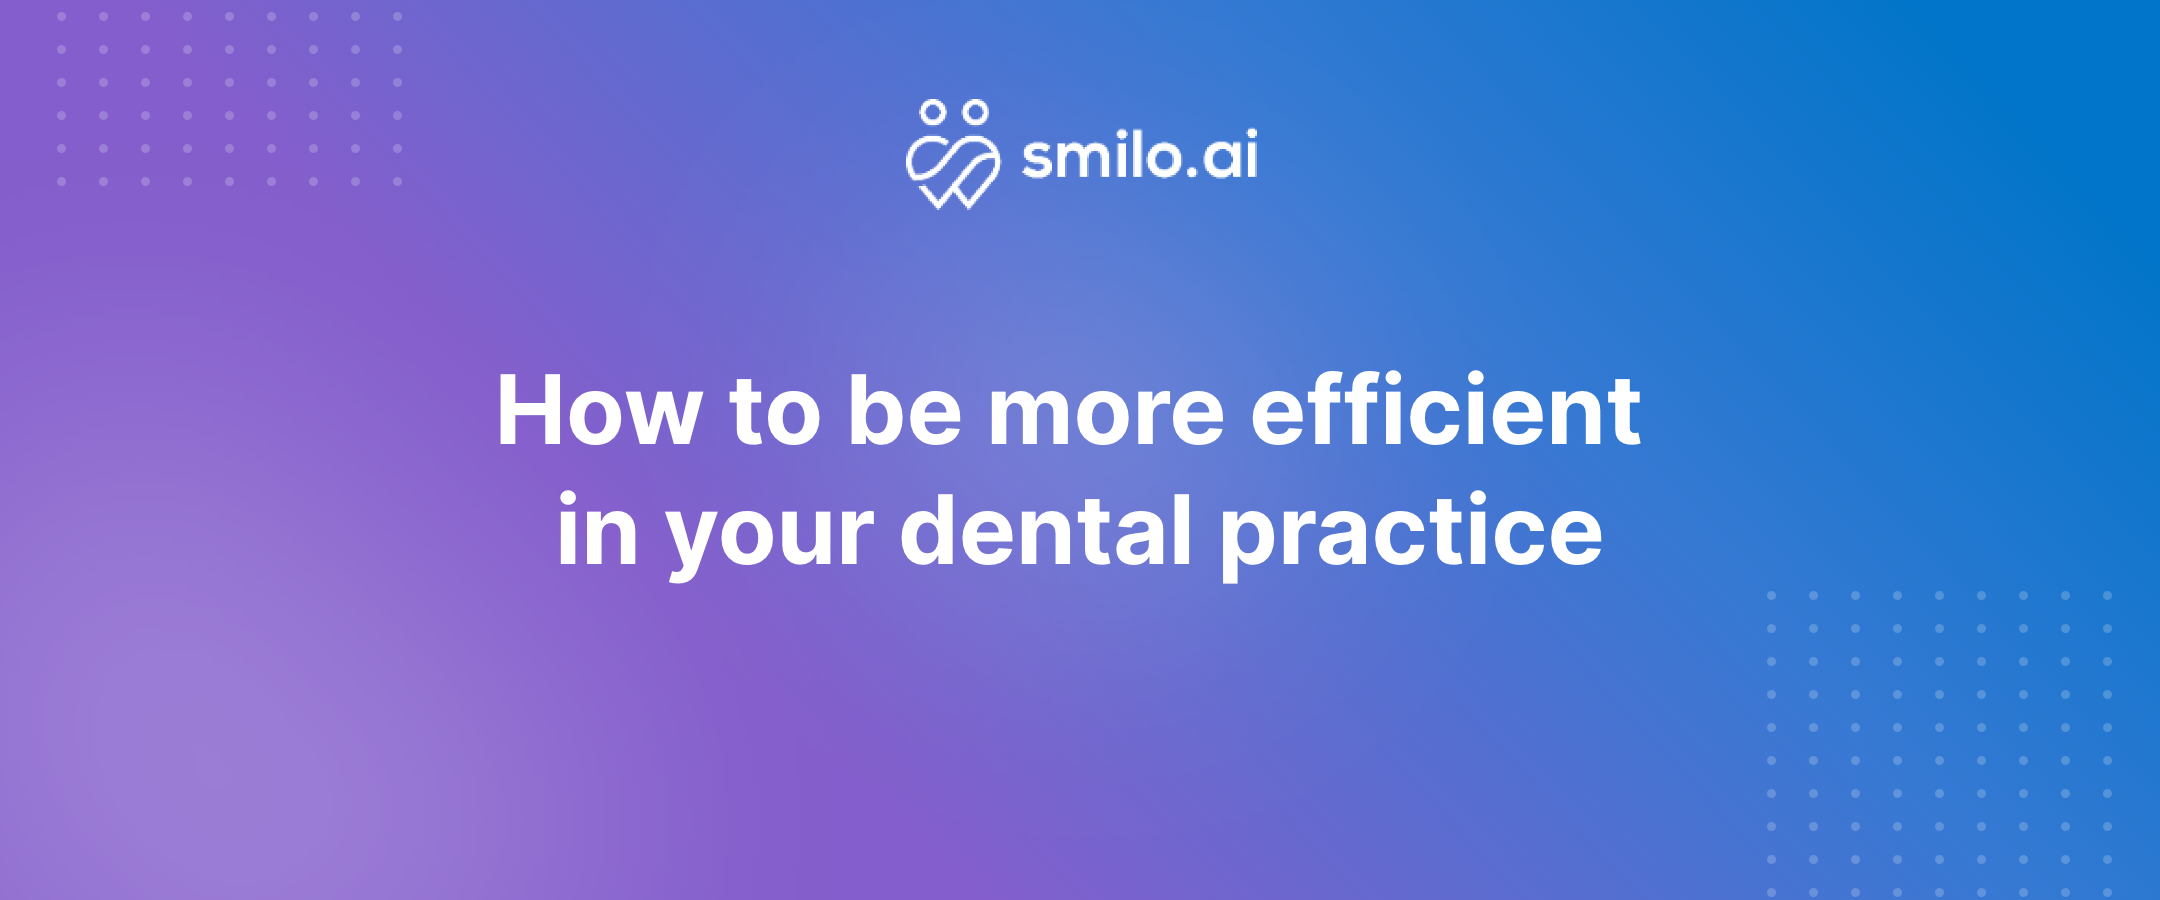 How to be more efficient in your dental practice.